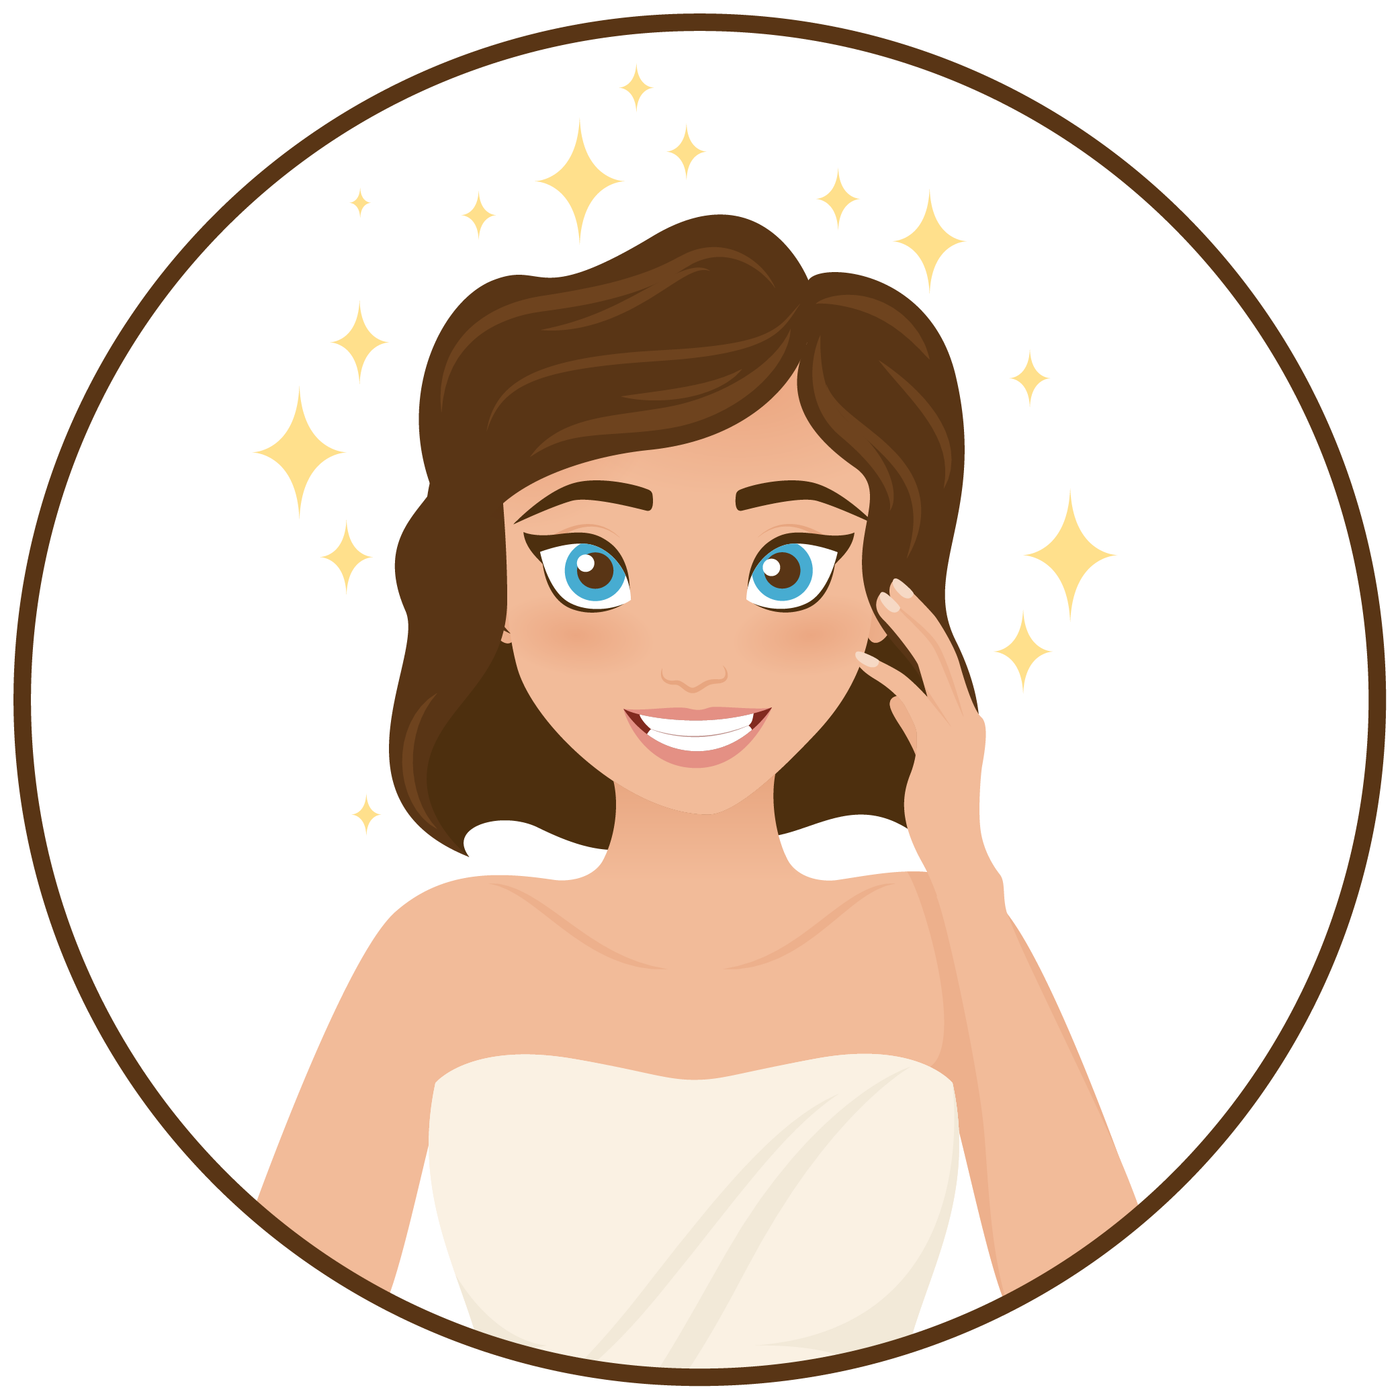 Animated image of happy woman with sparkling blue eyes, brown hair, and stars around.